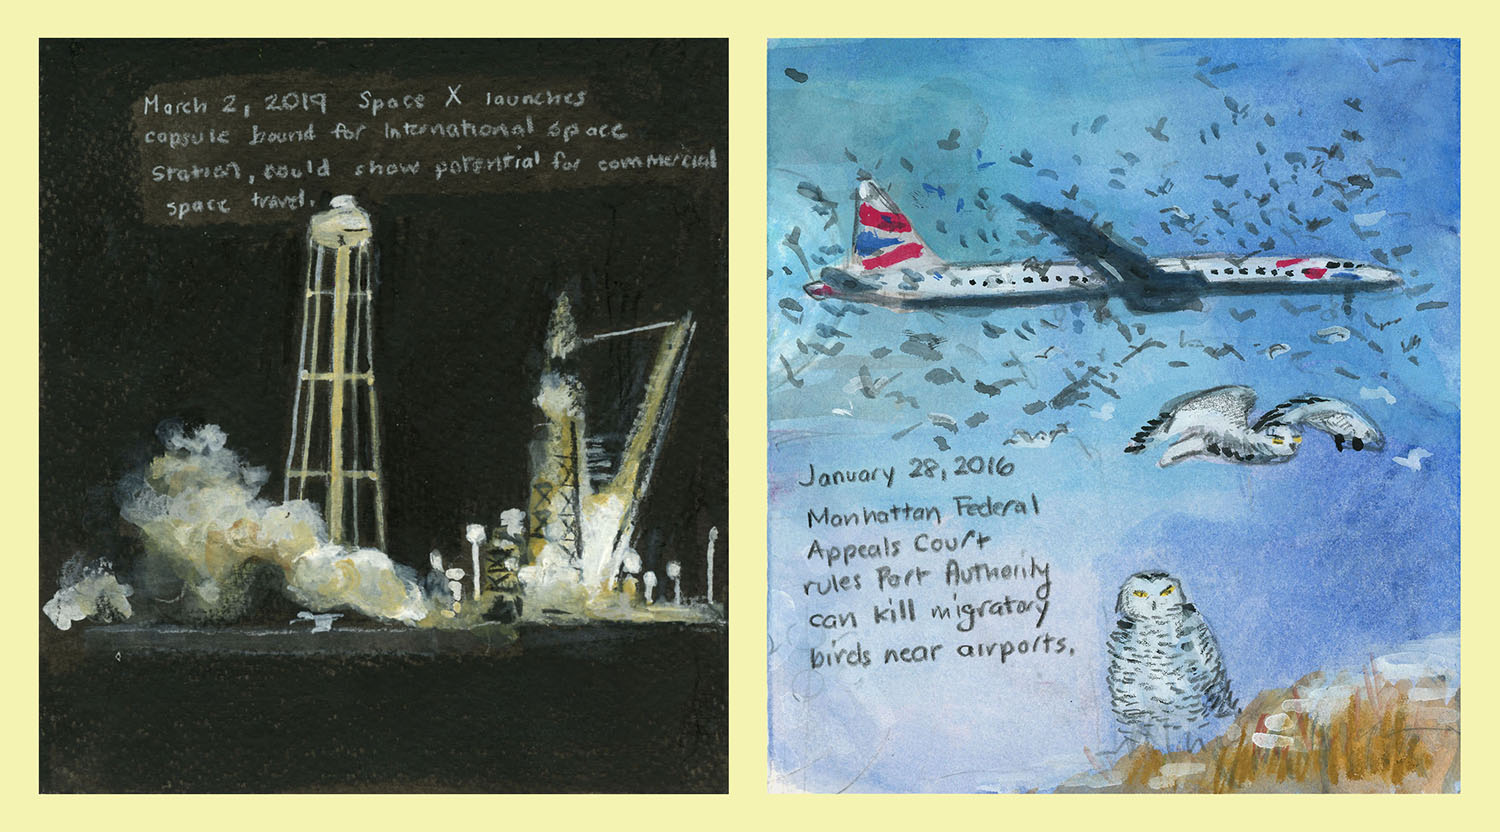 (LEFT): Day 1,197 (March 2, 2019). India ink, casein, gouache, watercolor, color pencil, graphite on paper, 6 x 5 ½ in. <i>Space X launches capsule bound for International Space Station, could show potential for commercial space travel.</i>; (RIGHT): Day 68 (Jan. 28, 2016). Watercolor, gouache, graphite, color pencil on paper, 6 x 5 ½ in. <i>Manhattan Federal Appeals Court rules Port Authority can kill migratory birds near airports.</i>